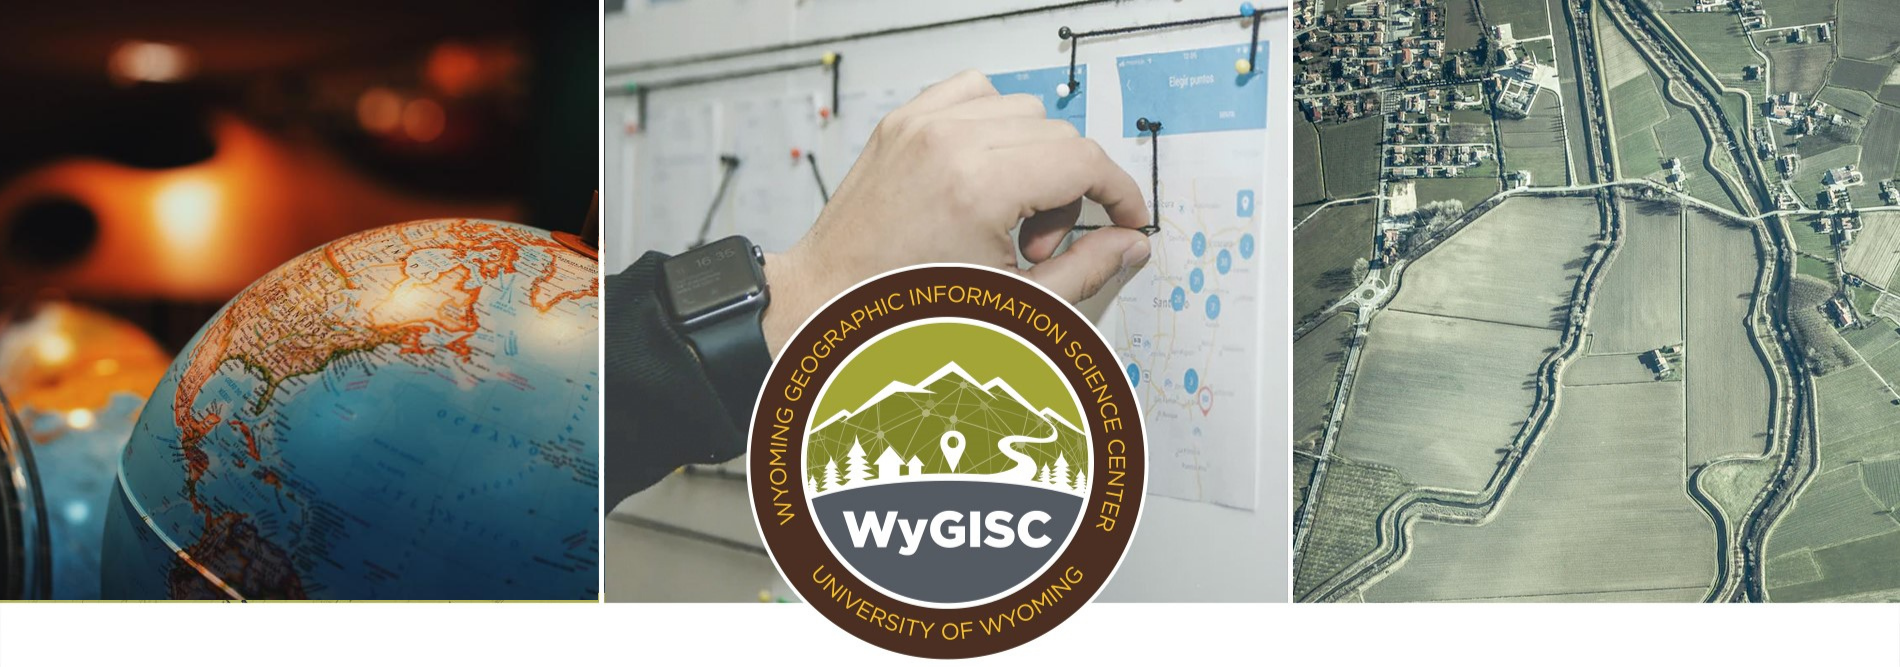 wygisc logo and images